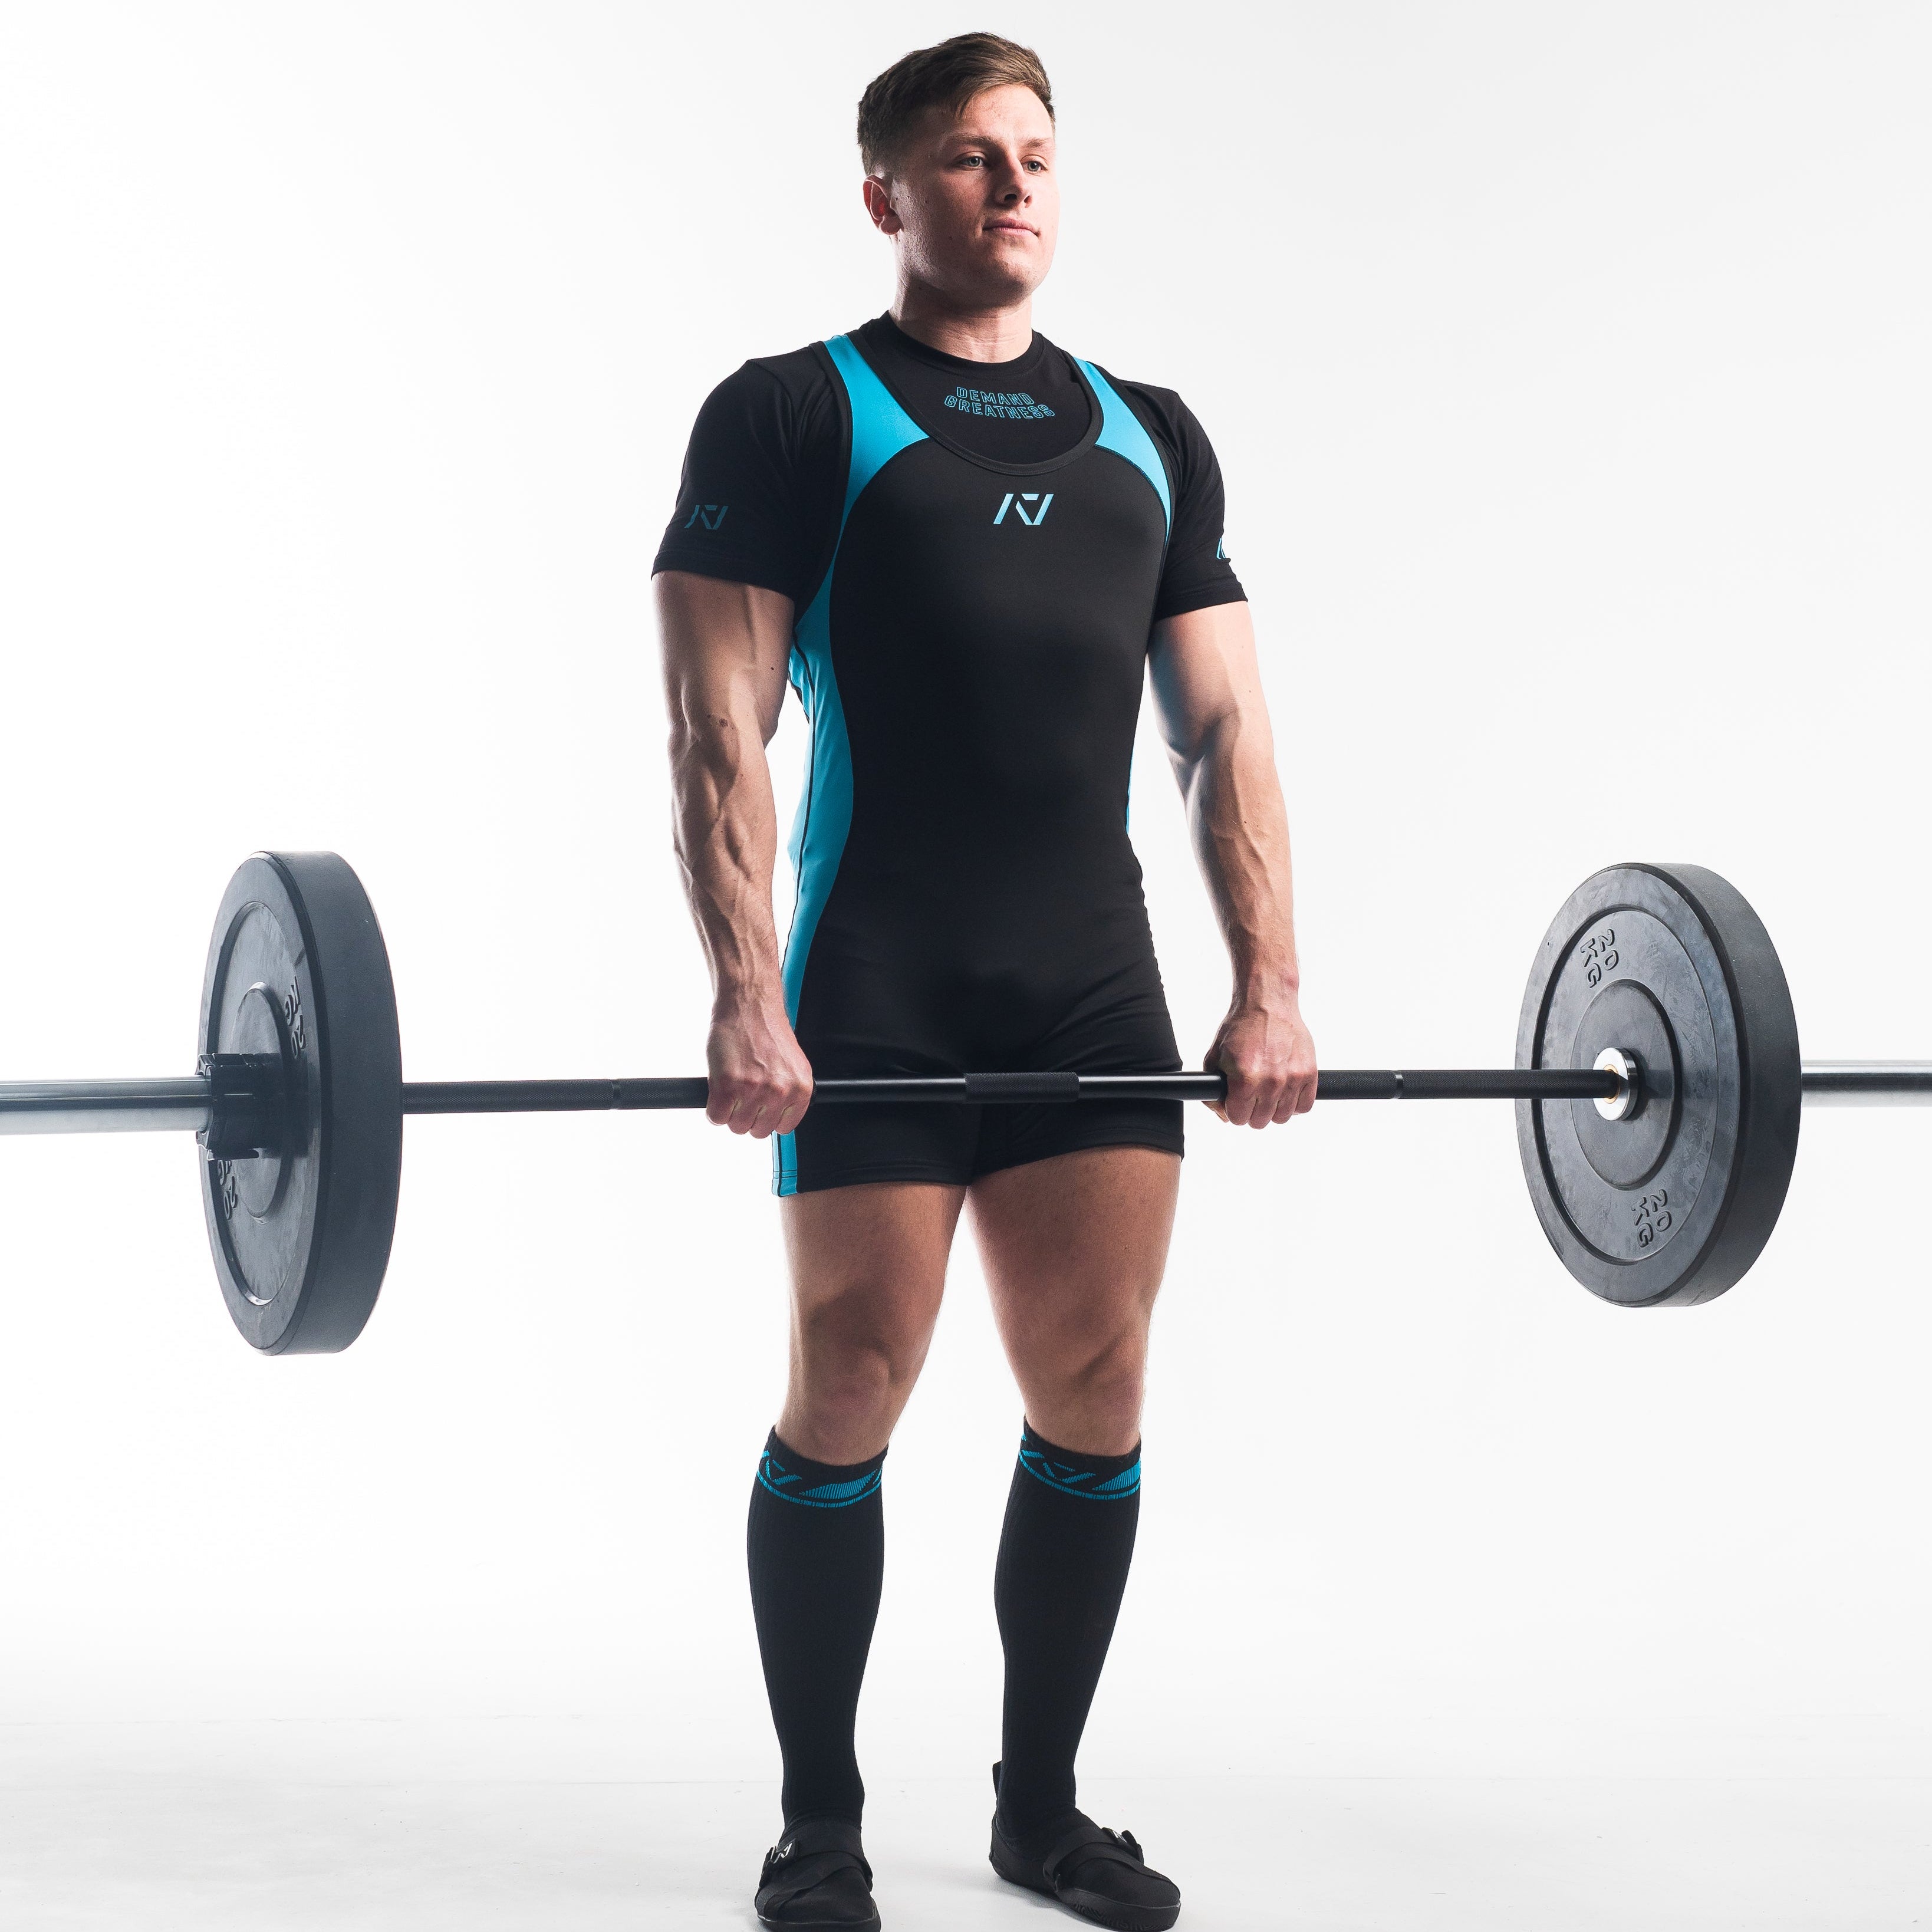 A7 IPF Approved Azul Luno singlet features extra lat mobility, side panel stitching to guide the squat depth level and curved panel design for a slimming look. The Women's cut singlet features a tapered waist and additional quad room. The IPF Approved Kit includes Powerlifting Singlet, A7 Meet Shirt, A7 Deadlift Socks. Genouillères powerlifting shipping to France, Spain, Ireland, Germany, Italy, Sweden and EU.